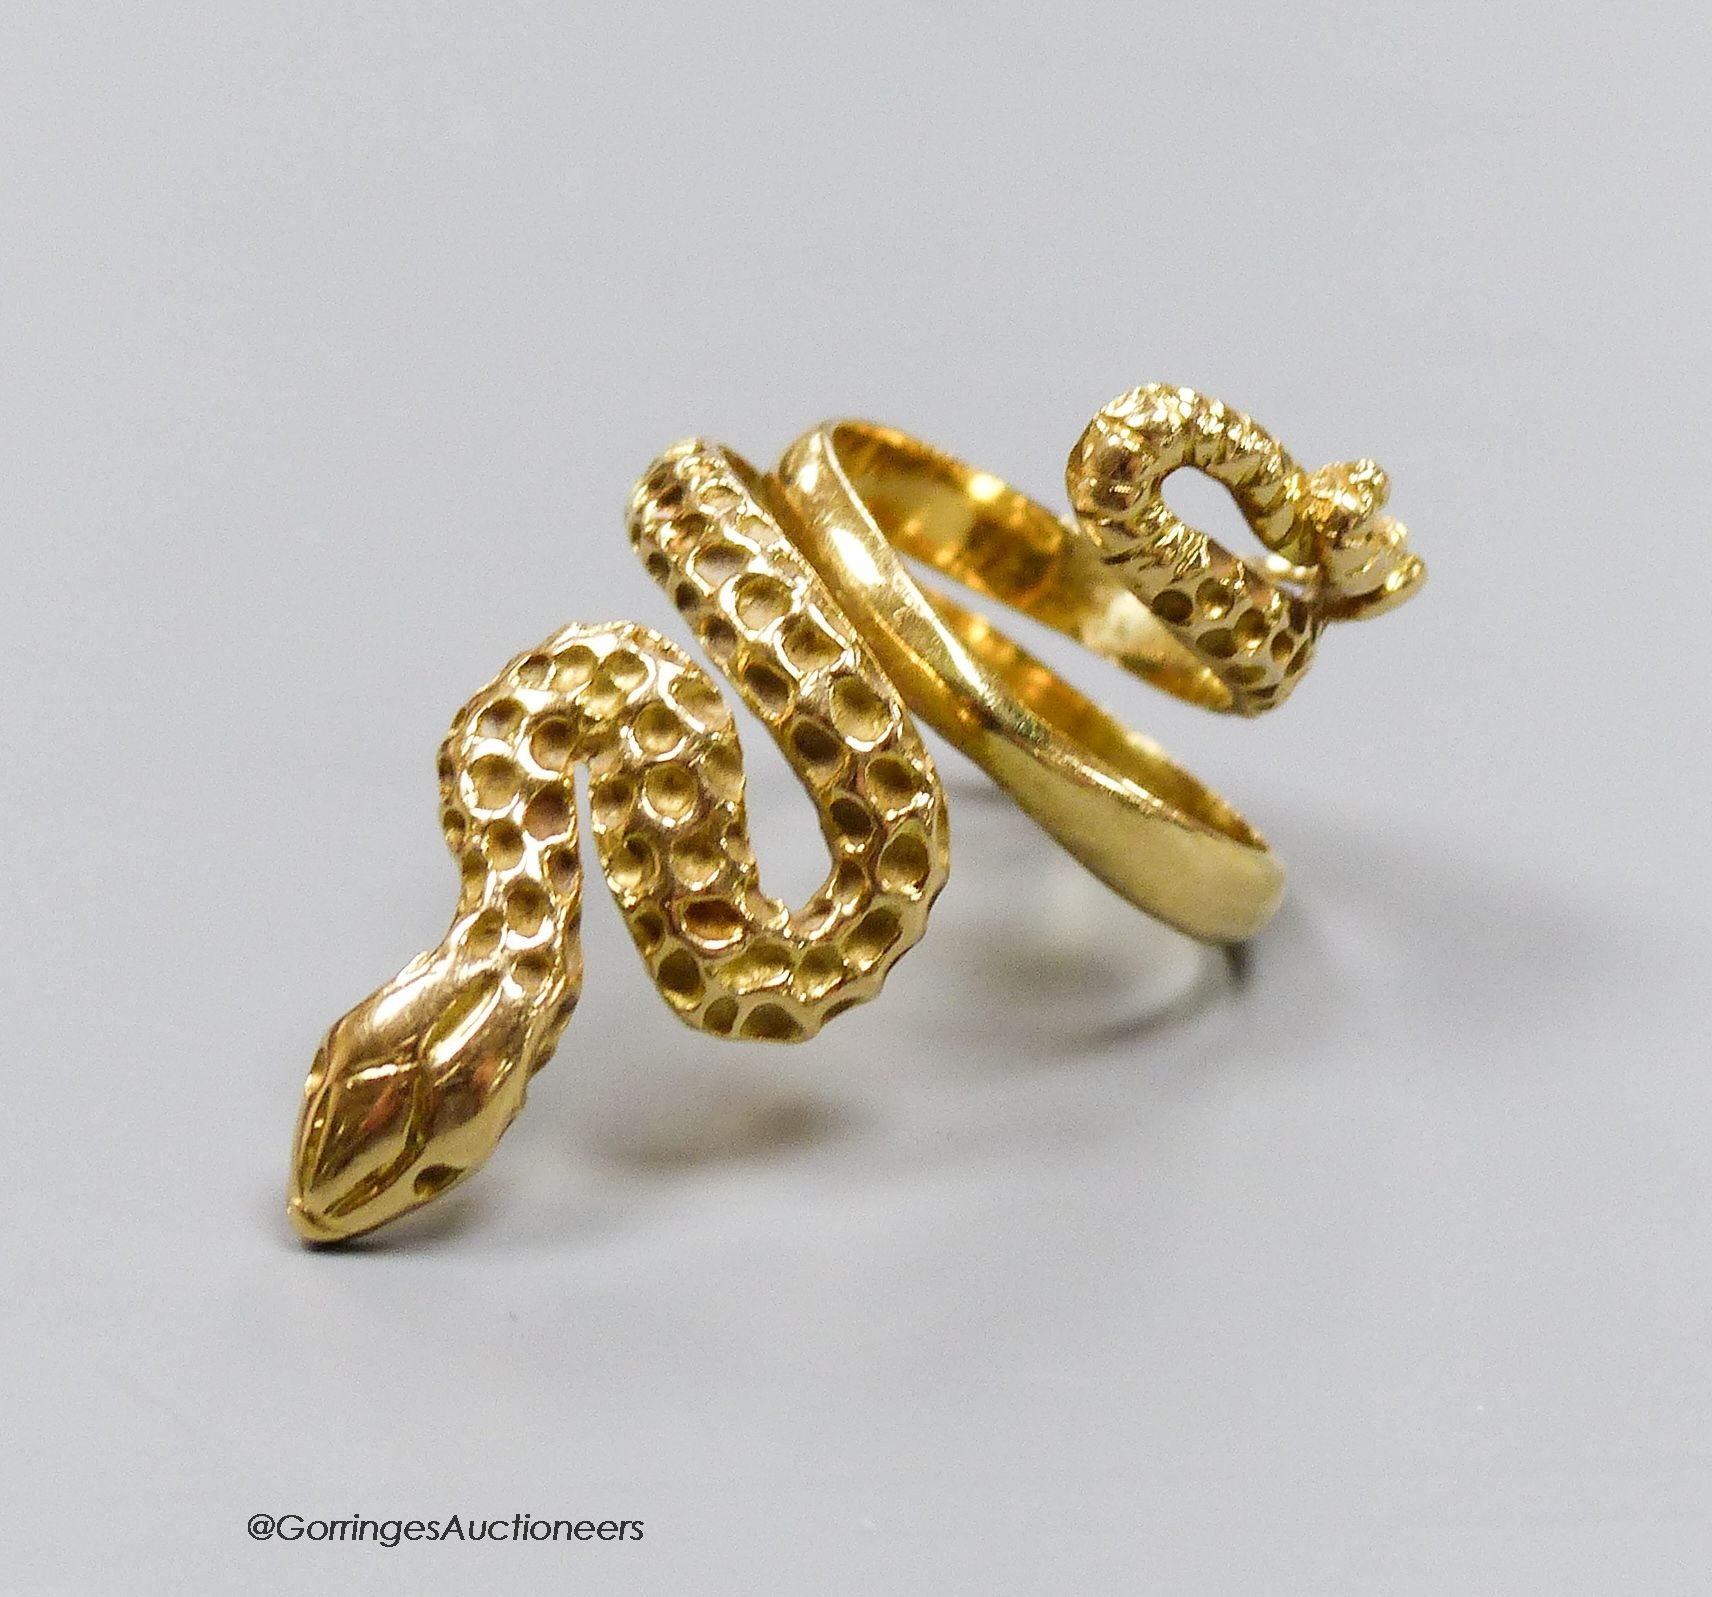 An 18ct gold (750) serpent ring, size F, 8.1g.